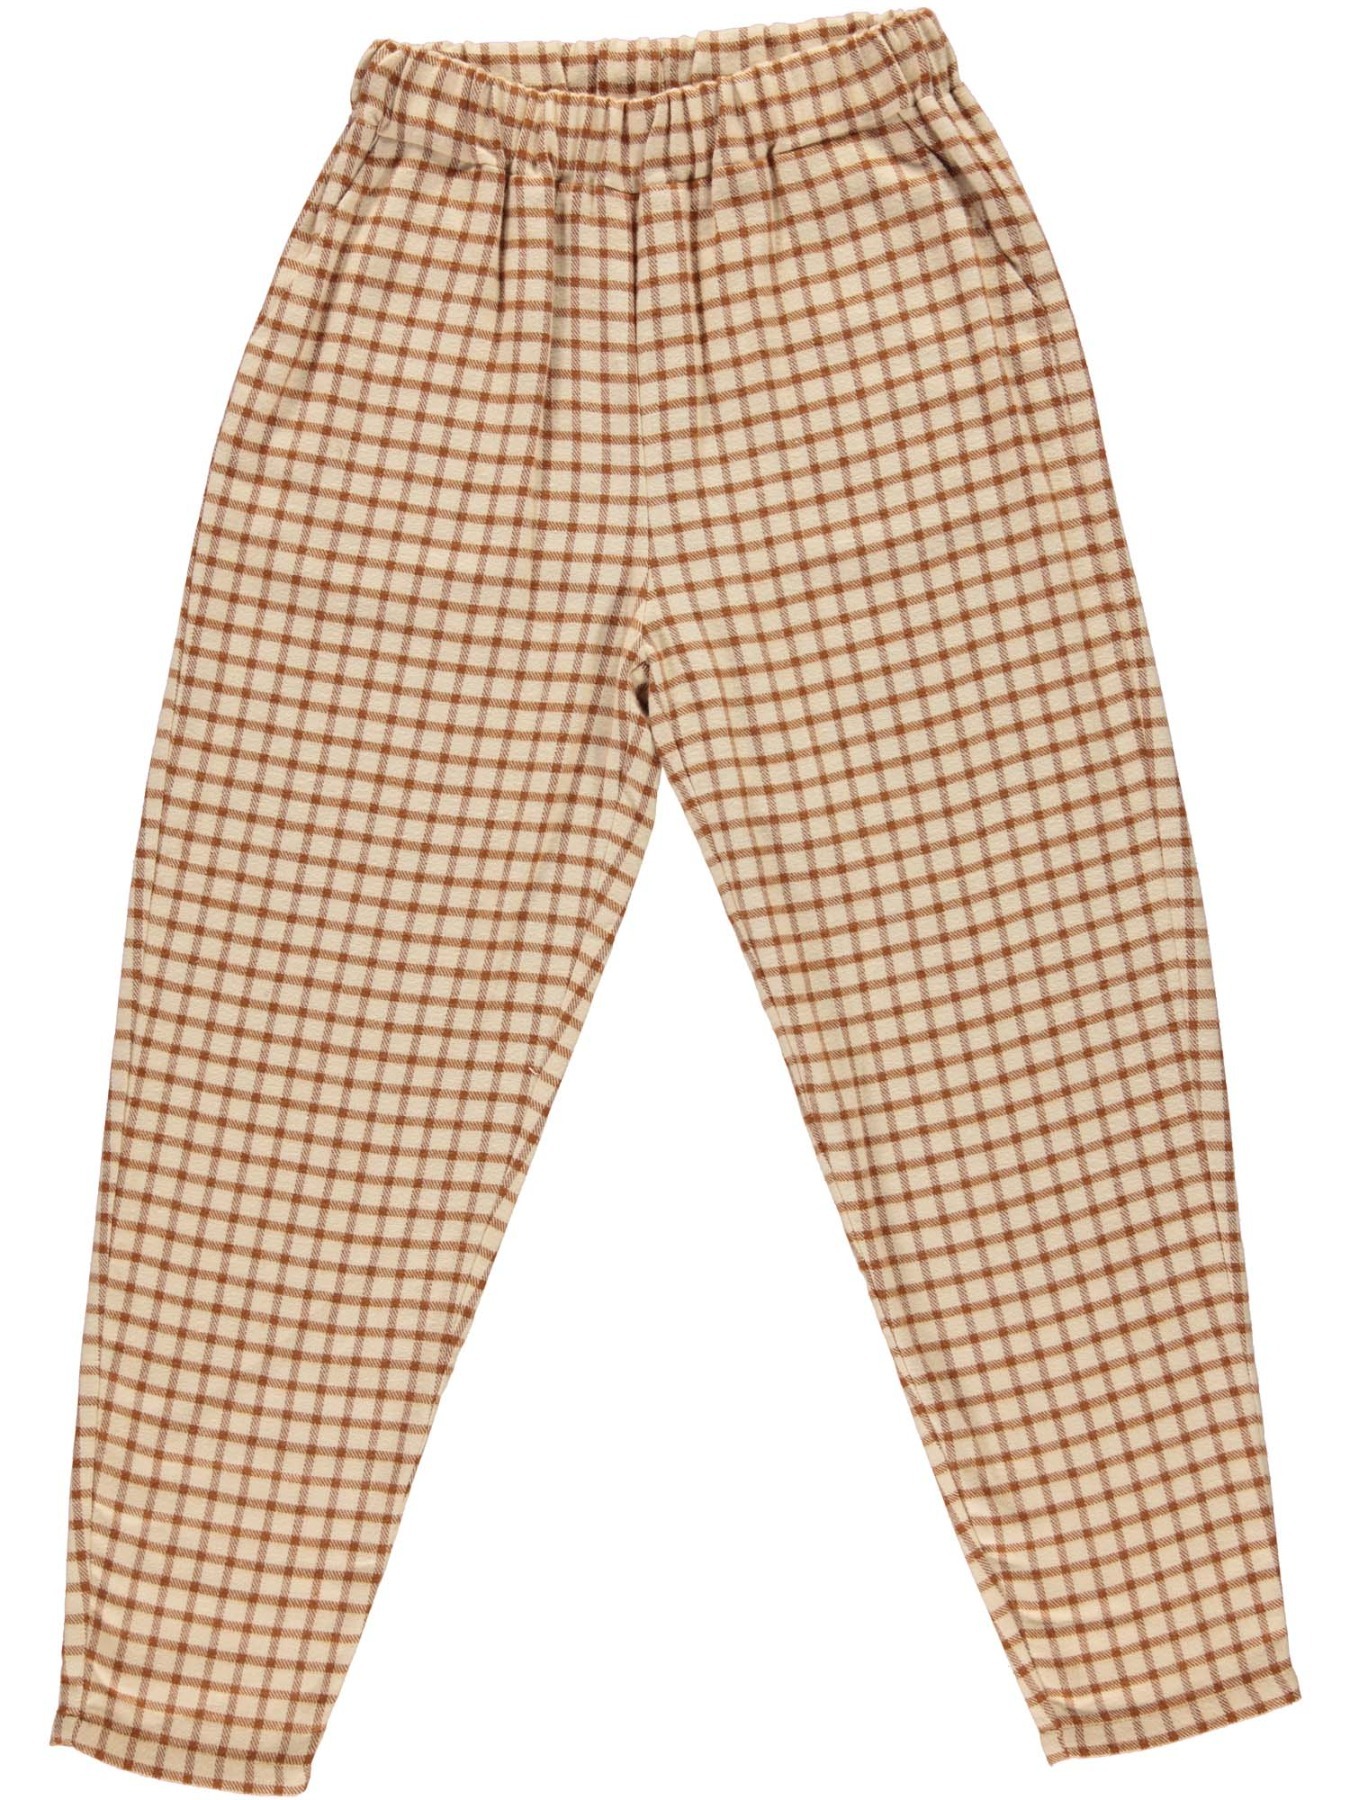 Monkind - Amber Check Chino - ADULT 8